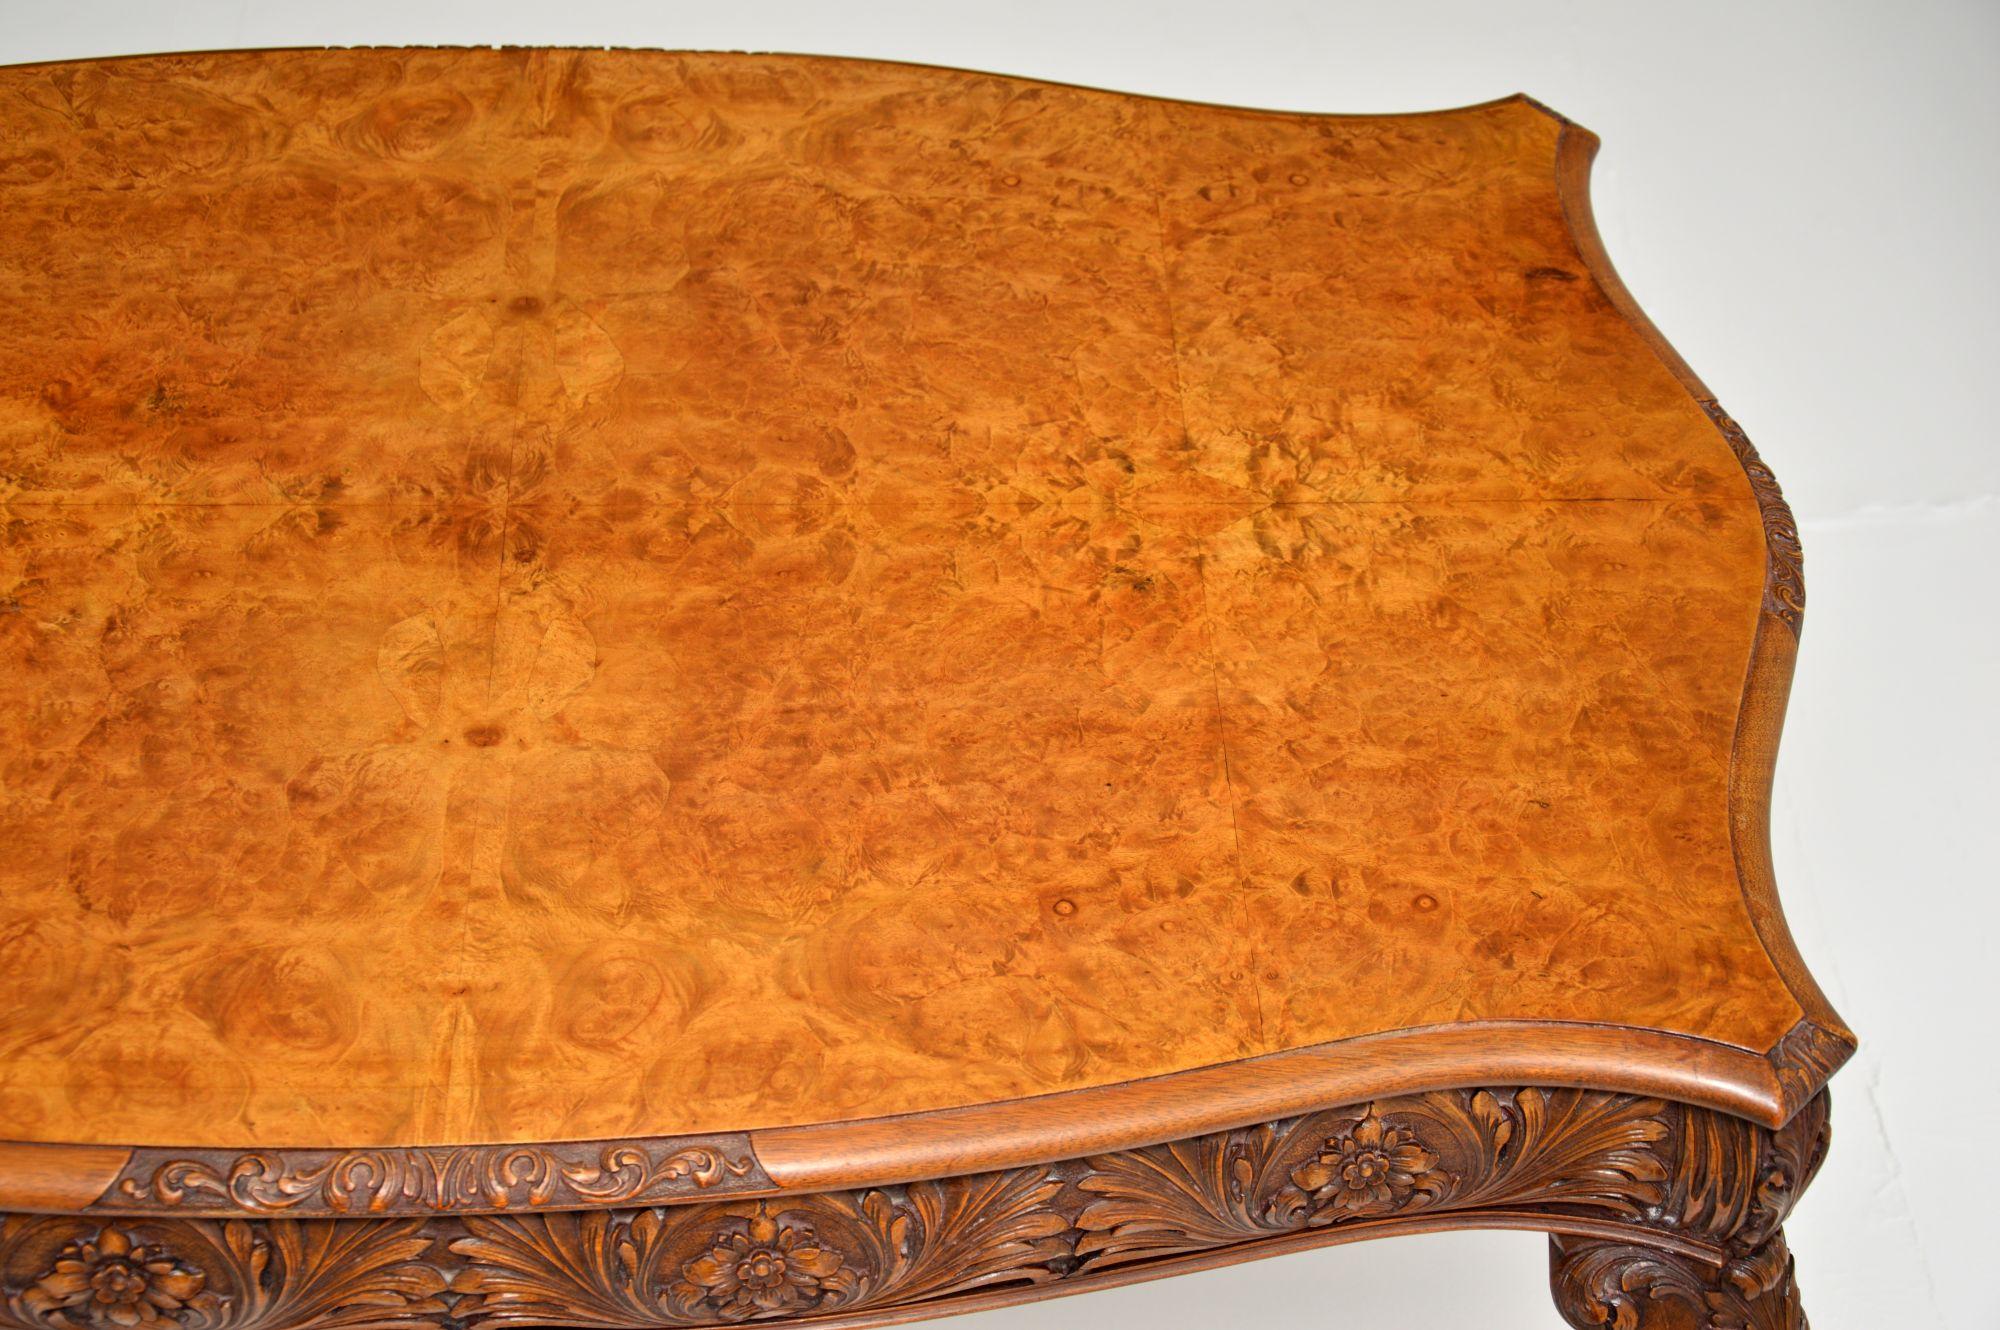 English Antique Burr Walnut Occasional Table or Desk